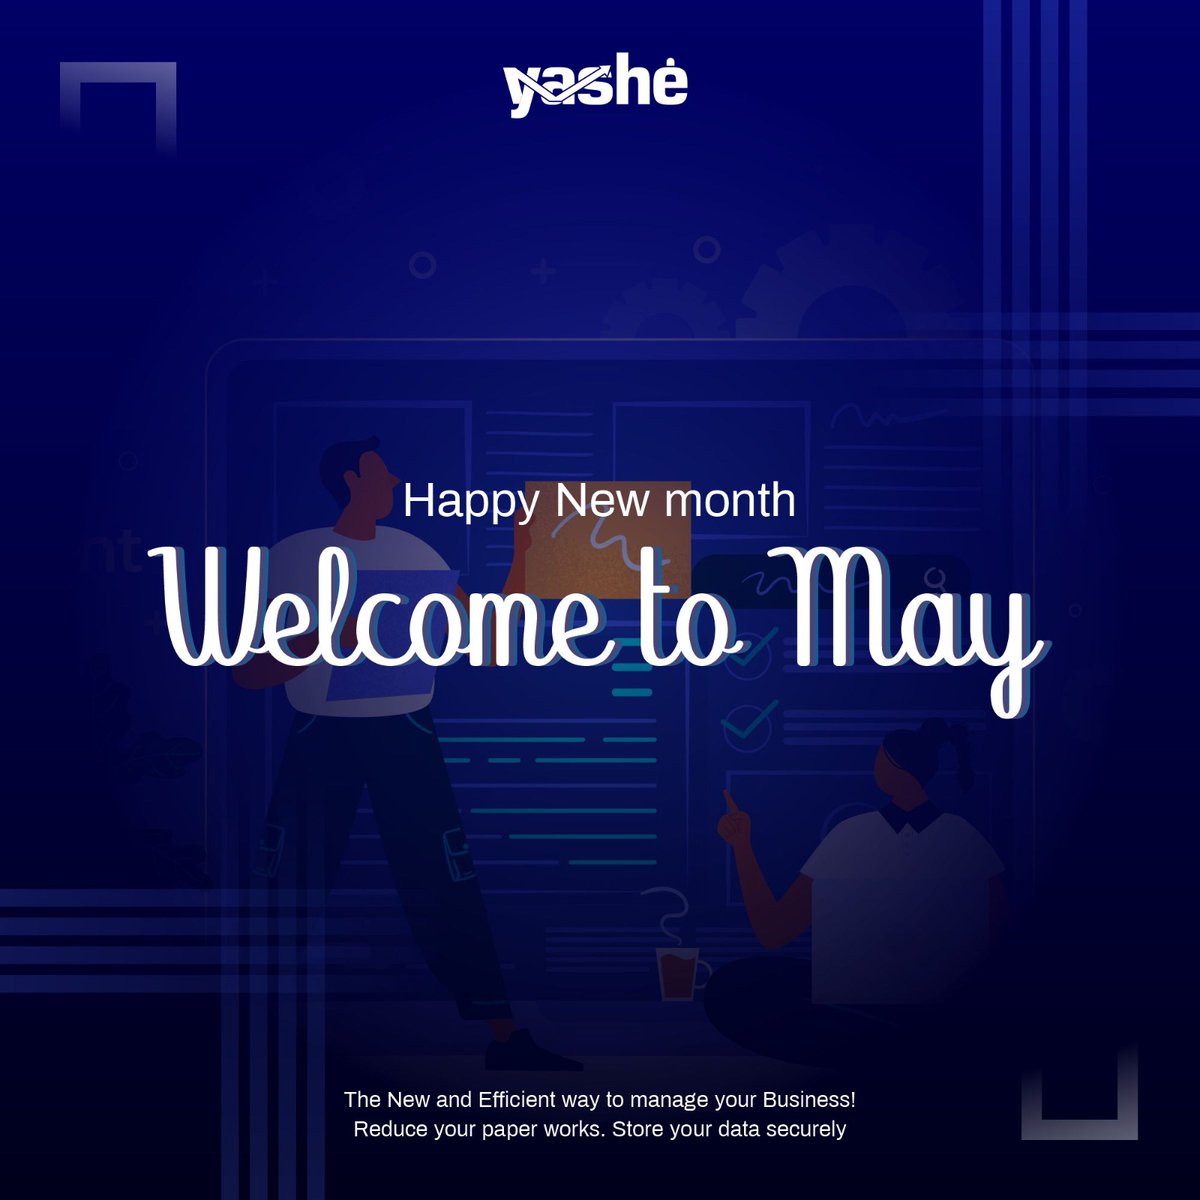 From the entire team of Yashe, we wish you a month full of new opportunities and good news! Happy New Month! Happy new month!
#yashe #Twitter #newmonth #invoicingsoftware #pointofsale #inventorysoftware #accountingsoftware